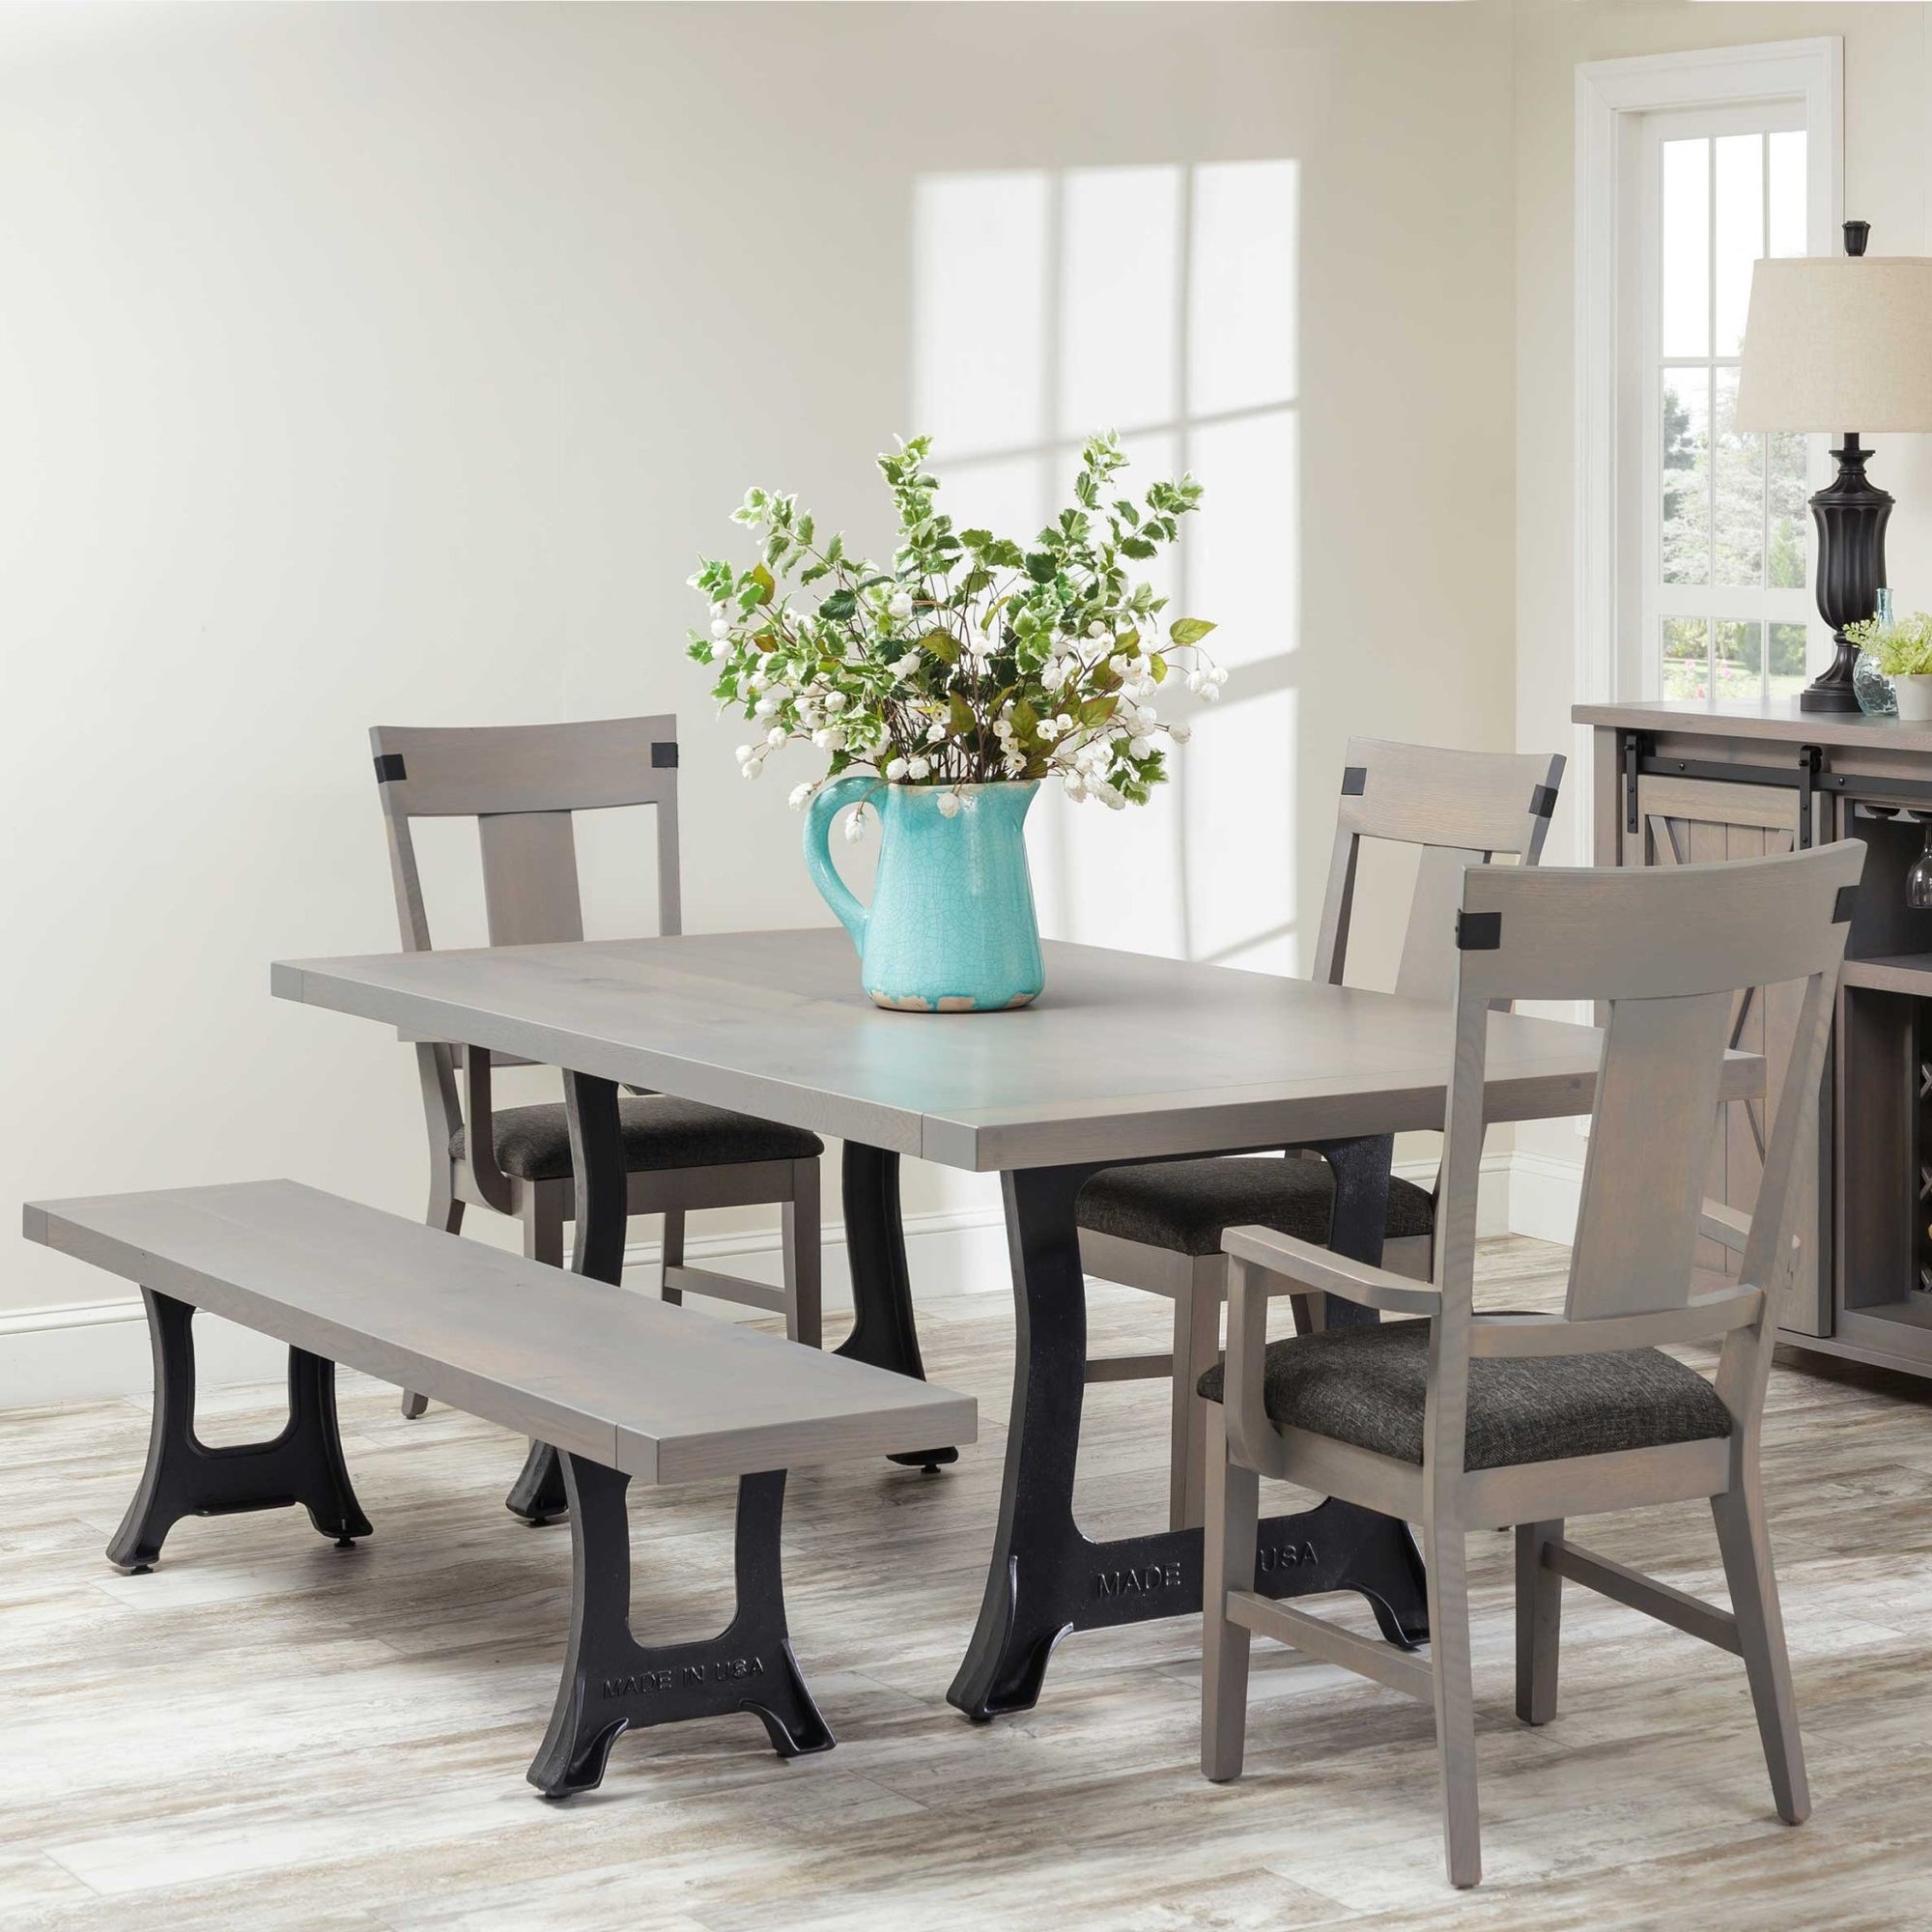 Lahoma Amish Iron Expandable Trestle Table - snyders.furniture